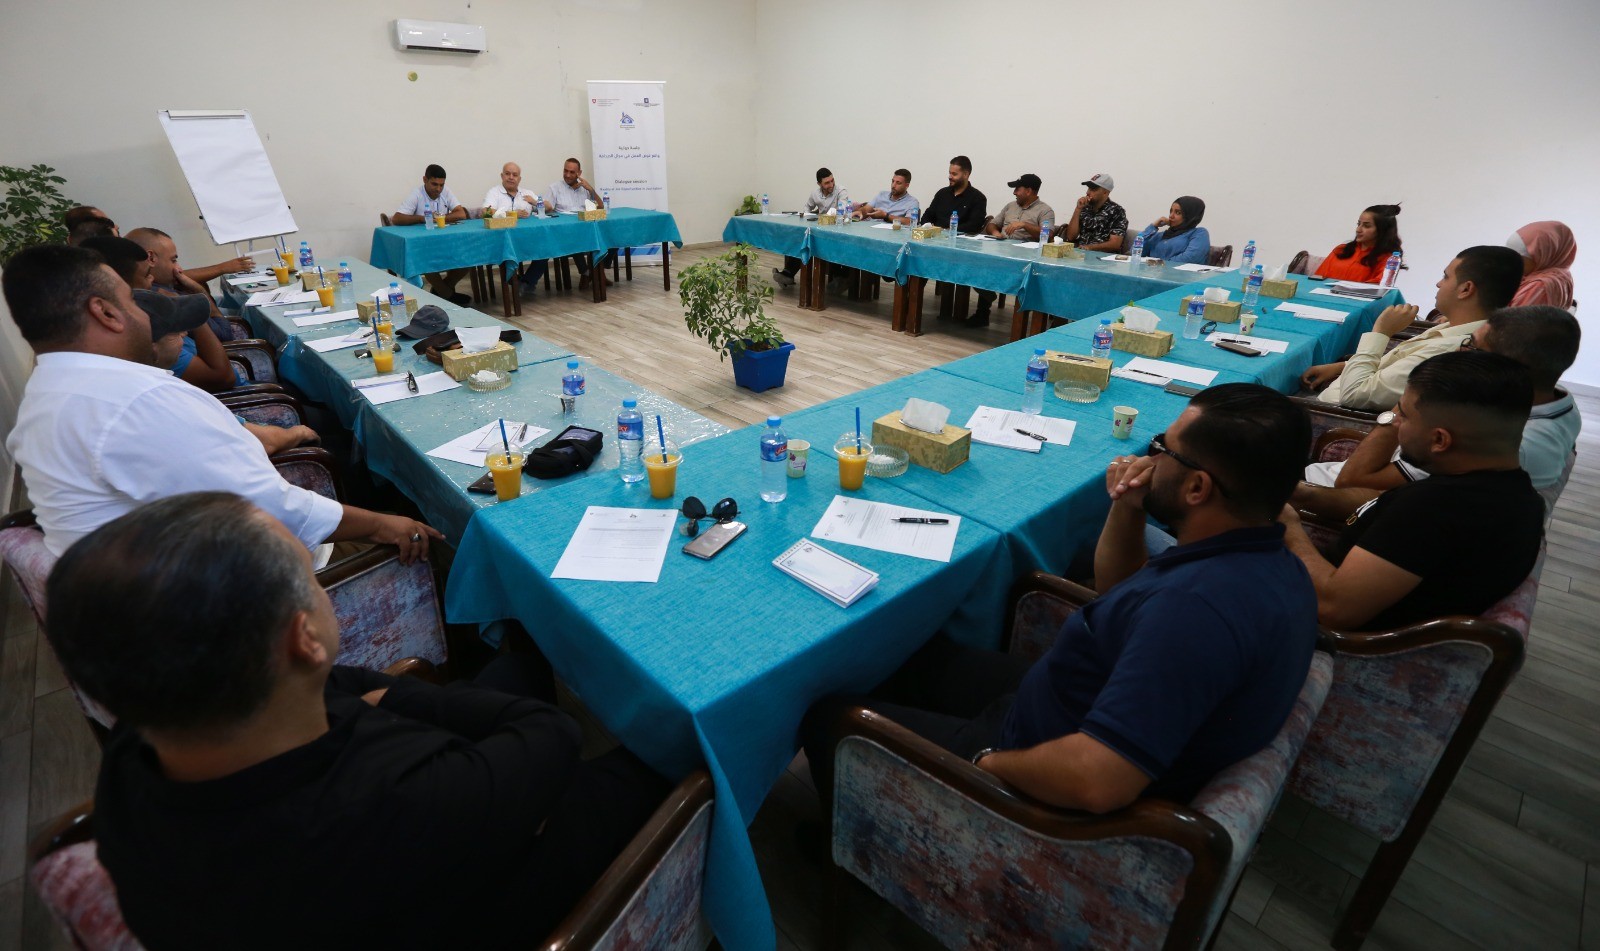 Press House holds a dialogue session on "Reality of Job Opportunities in Journalism" in the Middle of the Gaza Strip